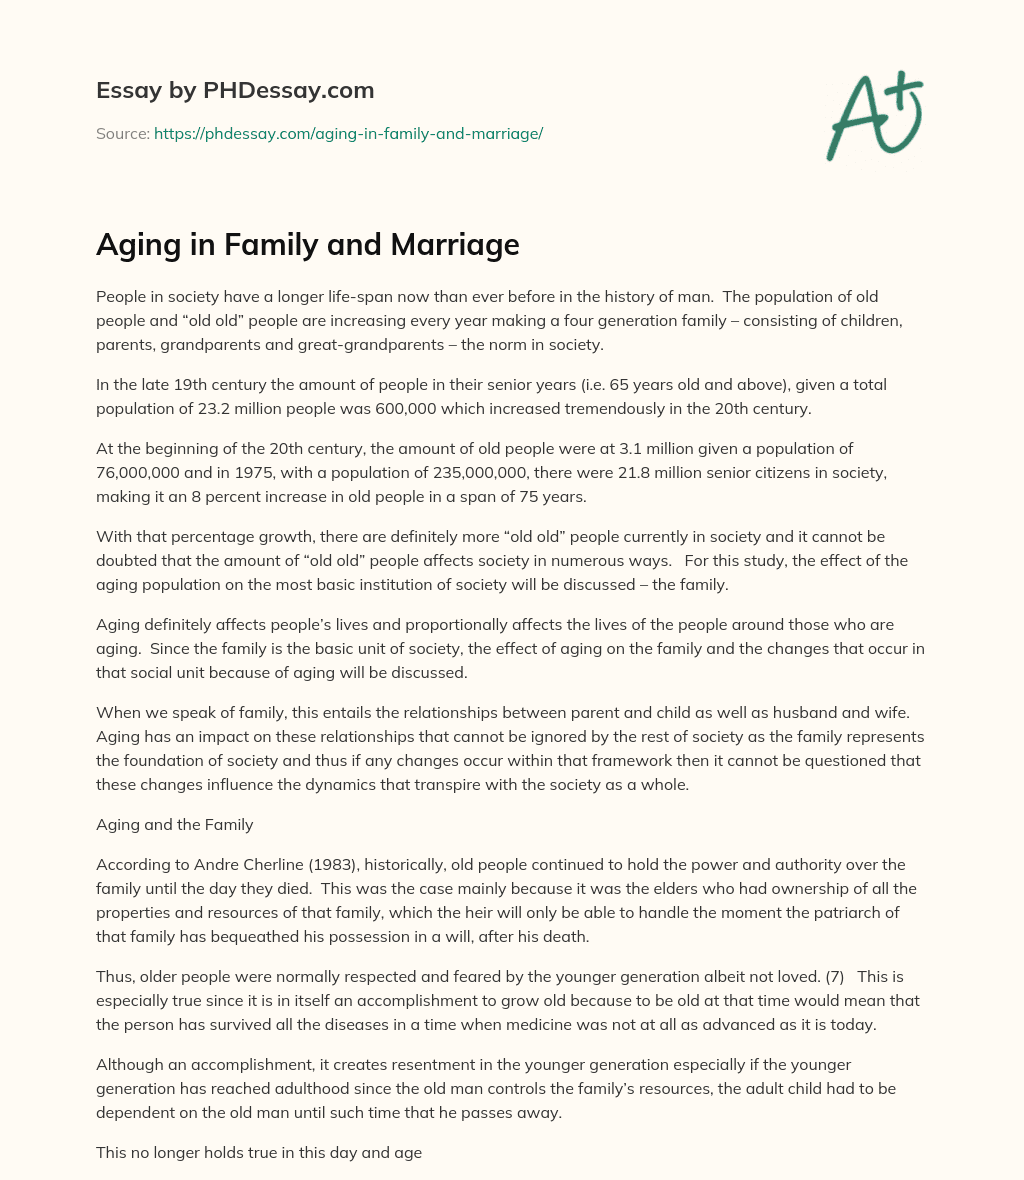 Aging in Family and Marriage essay